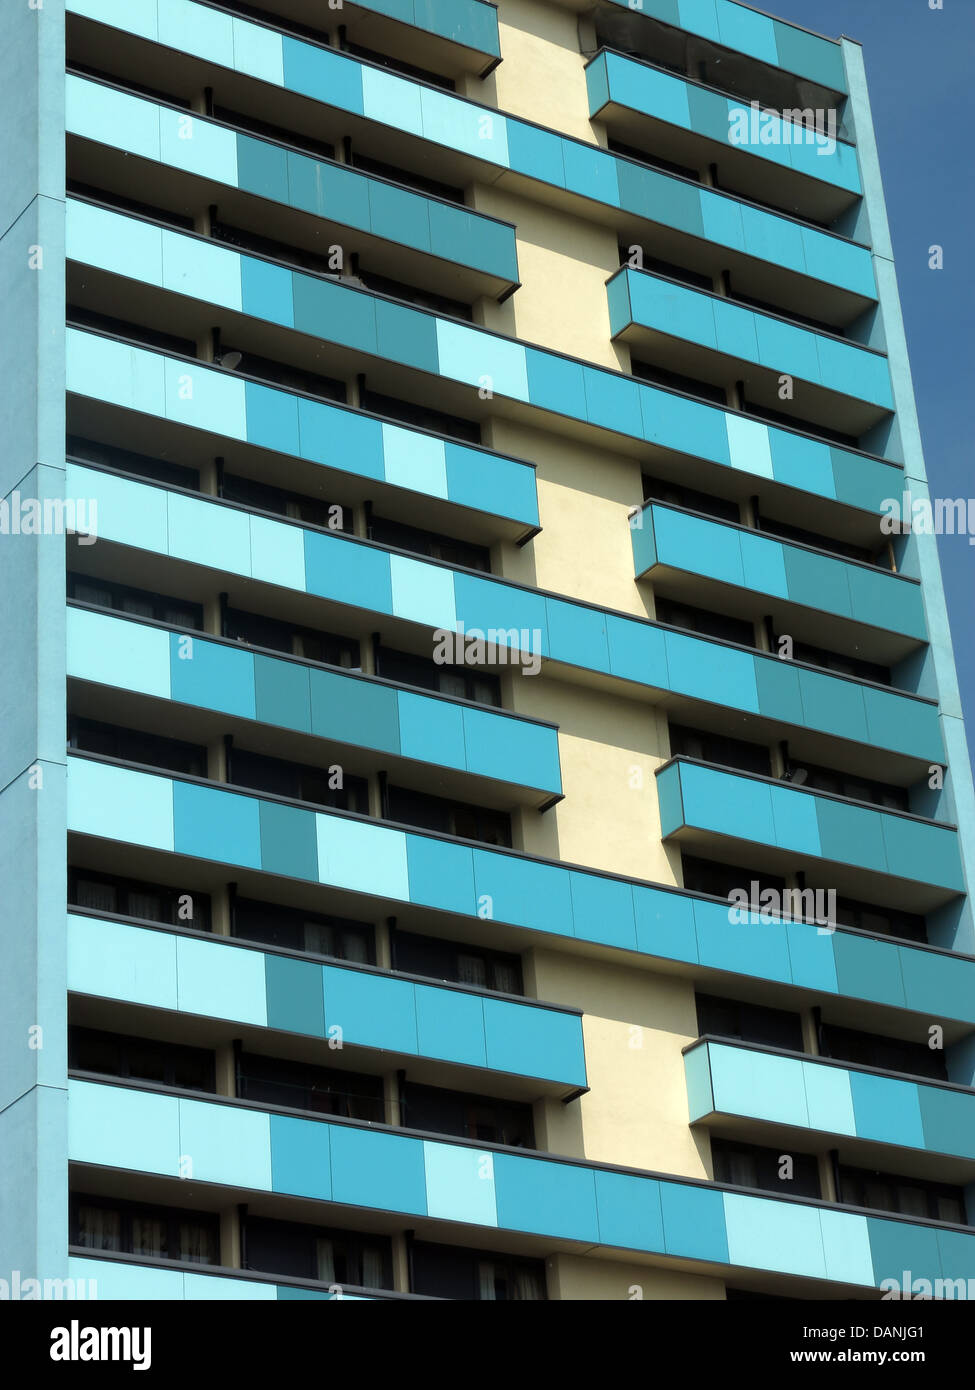 Large residential city tower blocks West Midlands near Wolverhampton England UK - painted blue and Teal Stock Photo